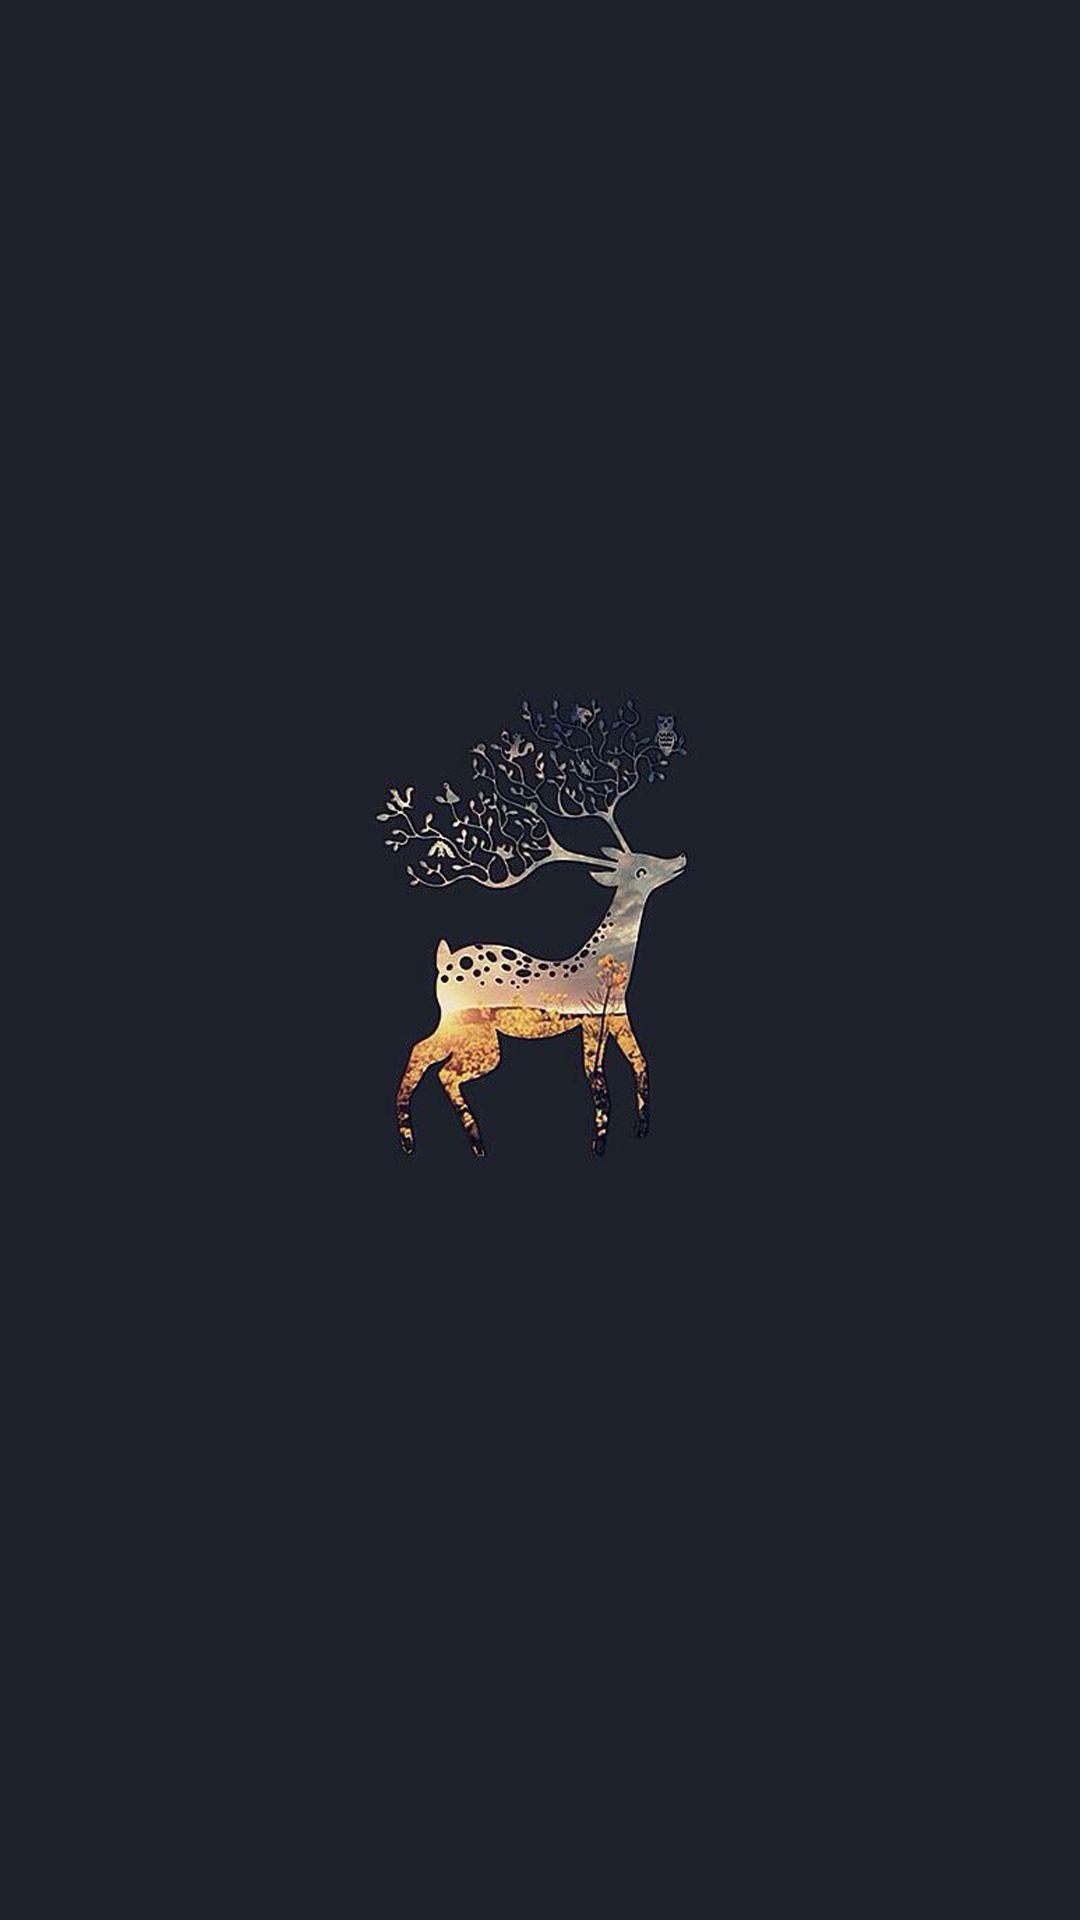 Download wallpaper 800x1420 deer silhouette horns night iphone  se5s5c5 for parallax hd background